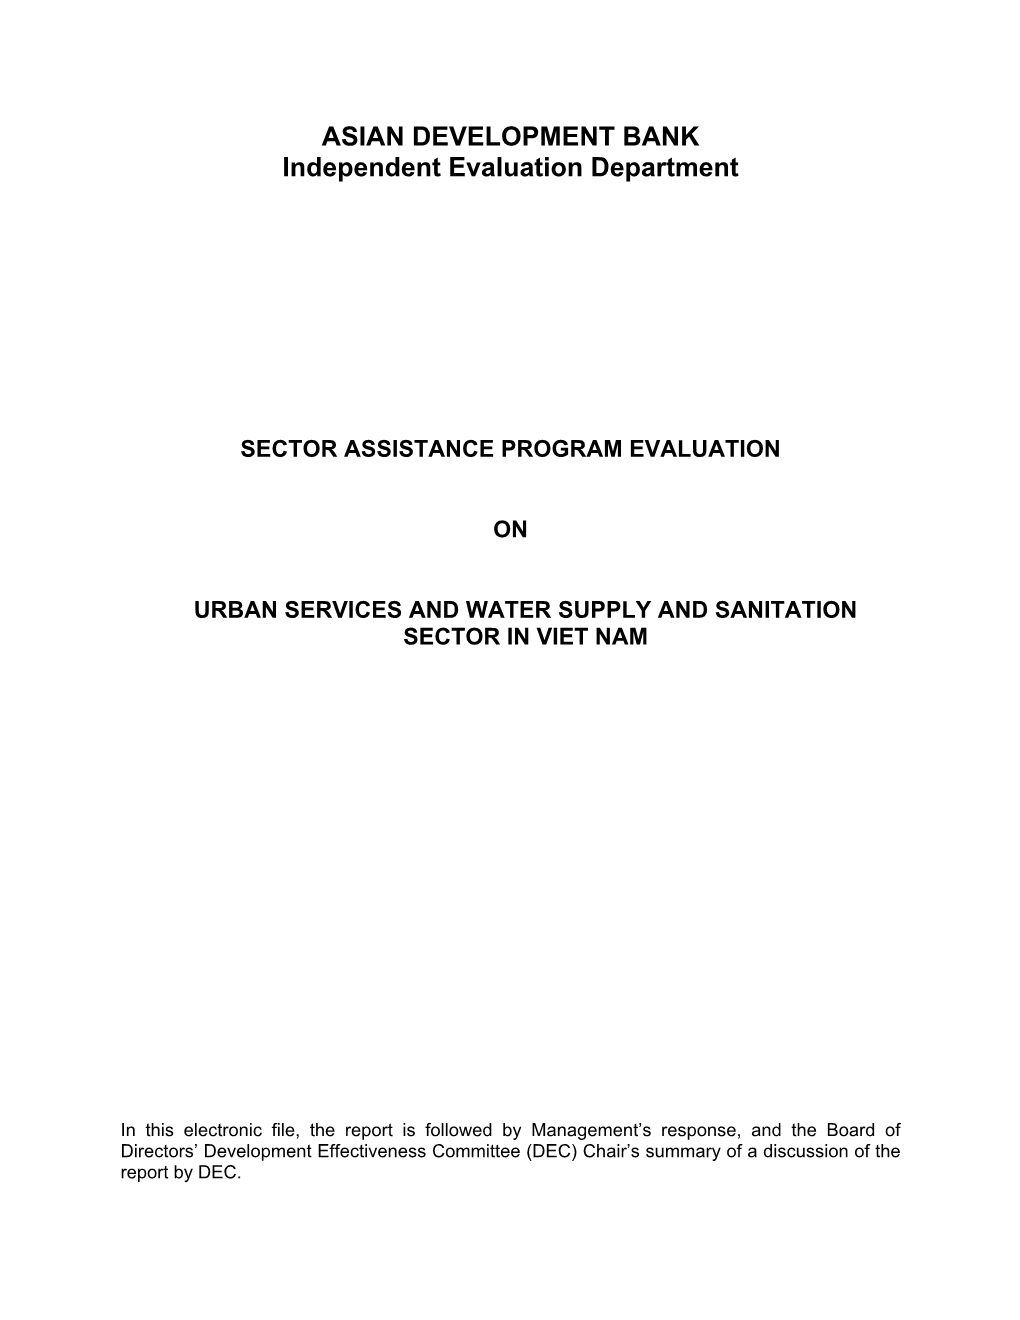 Evaluation of Urban Services and Water Supply and Sanitation Sector